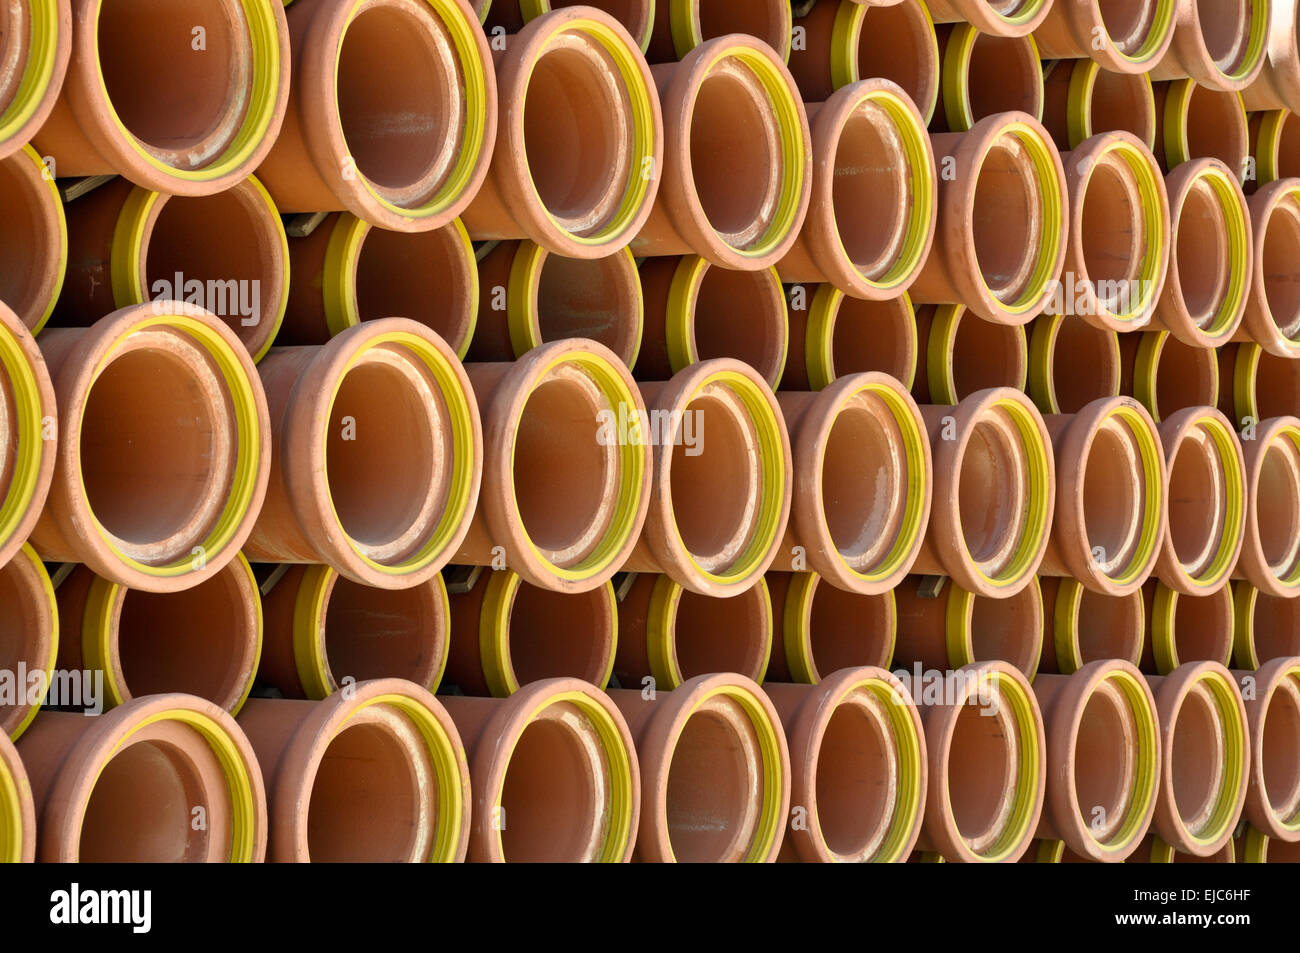 Ceramic Sewer Pipes Stock Photo